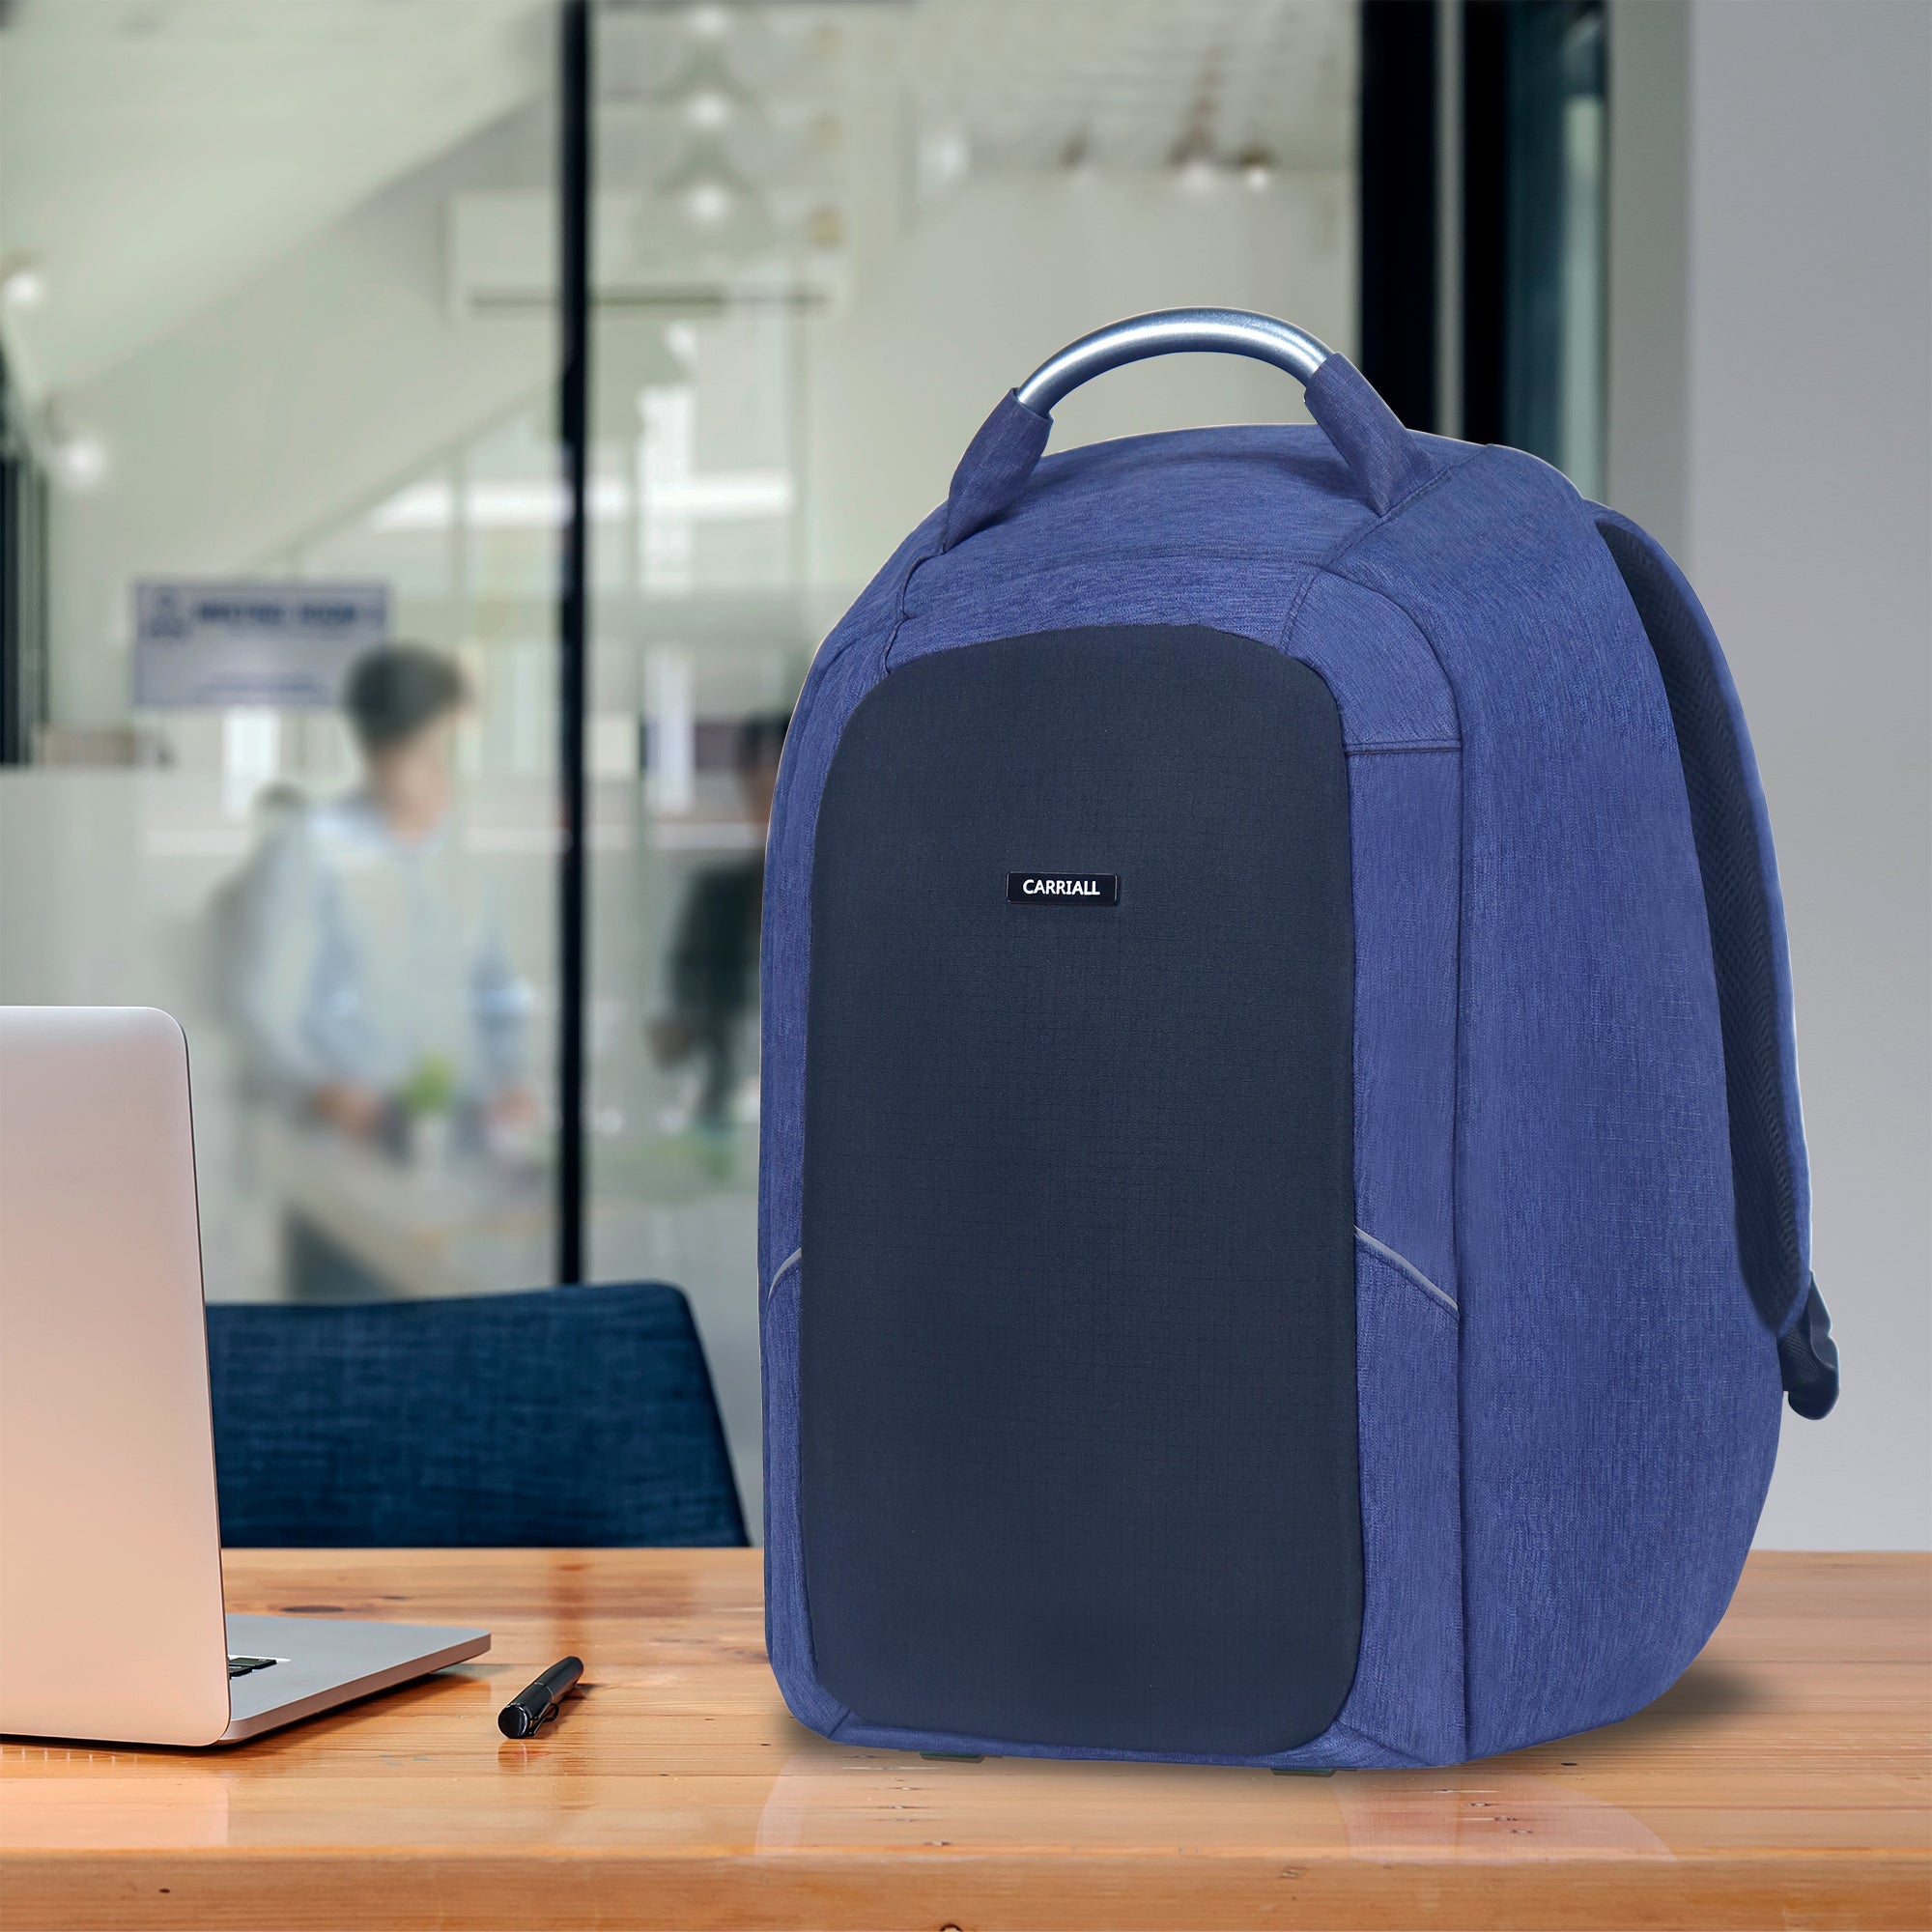 Smart backpack | Laptop backpack with On-the-go USB charging and Bluetooth tracker